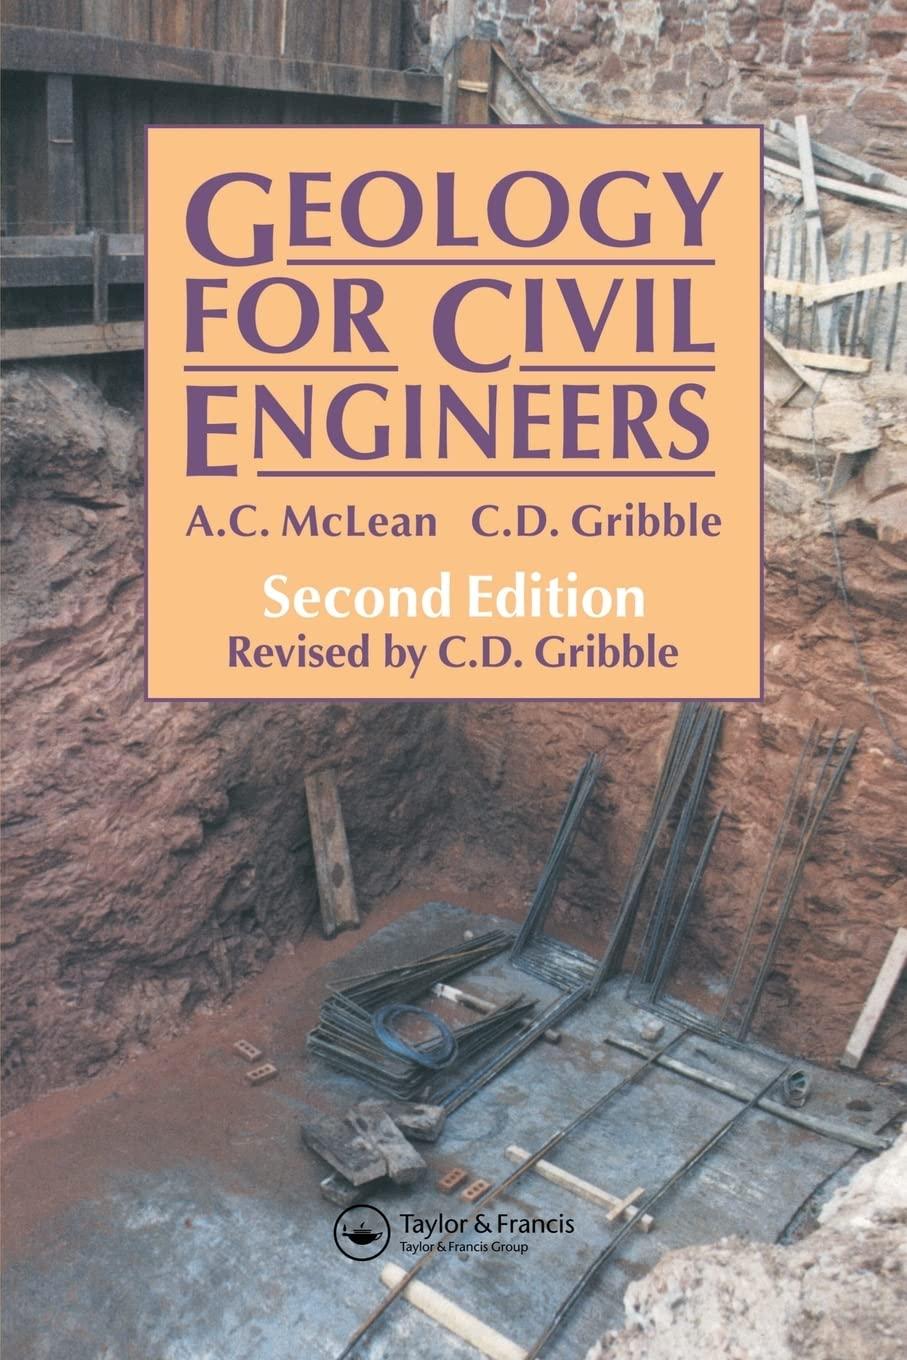 geology for civil engineers 2nd edition c. gribble, a. mclean 0419160000, 978-0419160007